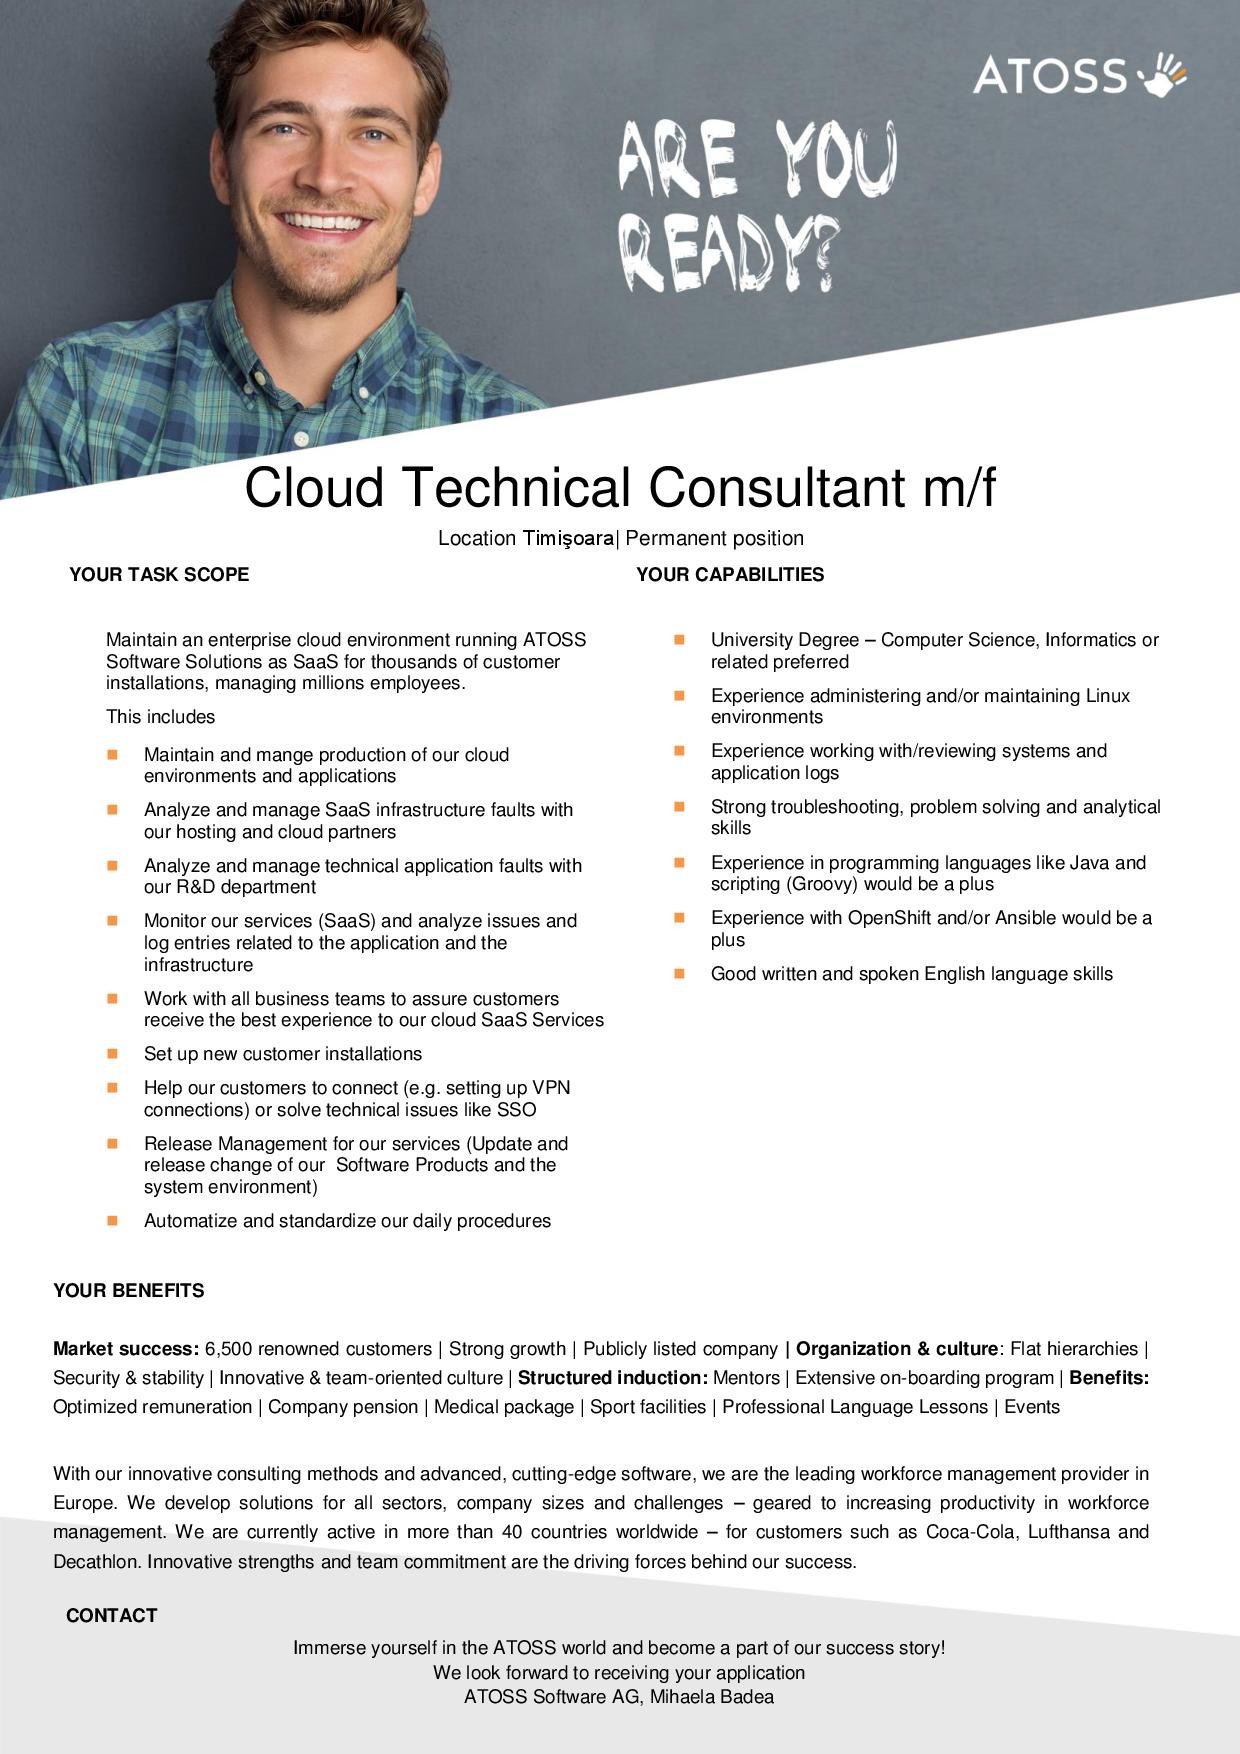 Cloud Technical Consultant_July 2019